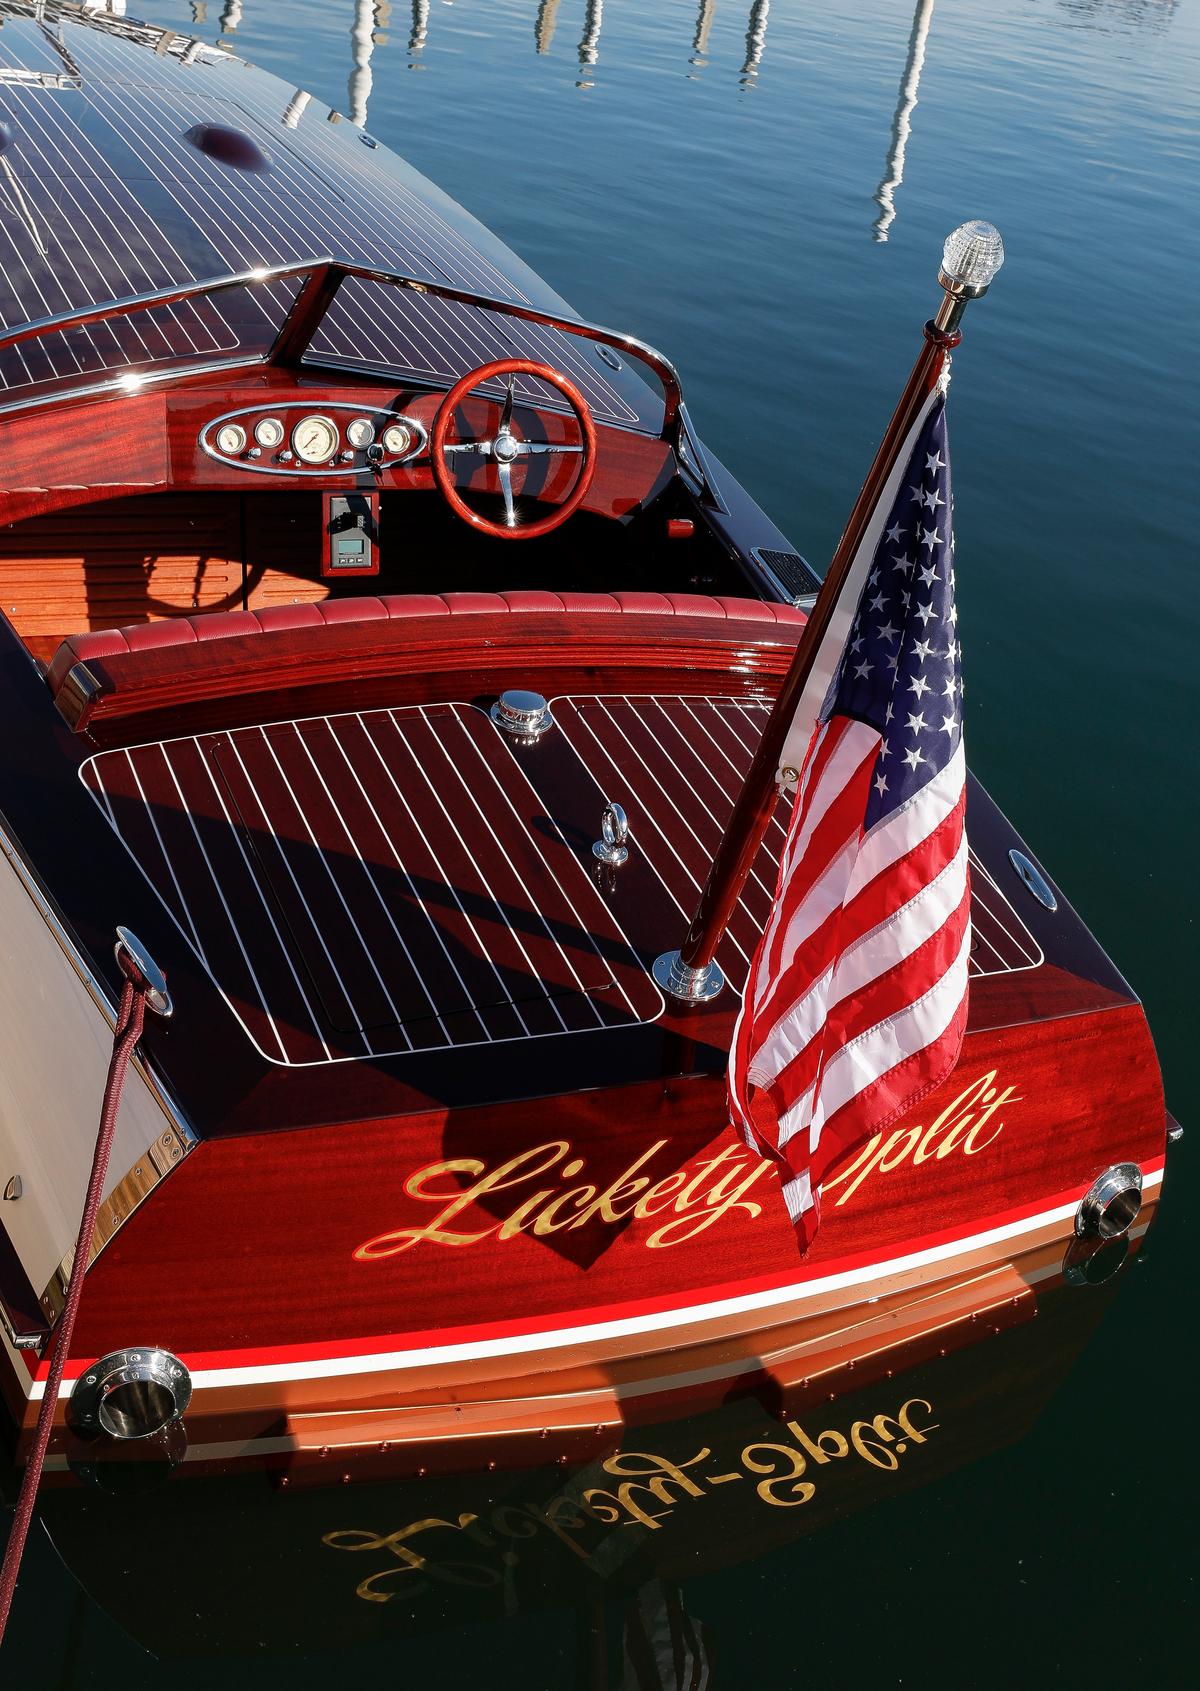 High-tech materials and techniques blend aesthetics to create floating heirlooms. (Courtesy of Van Dam Boats)